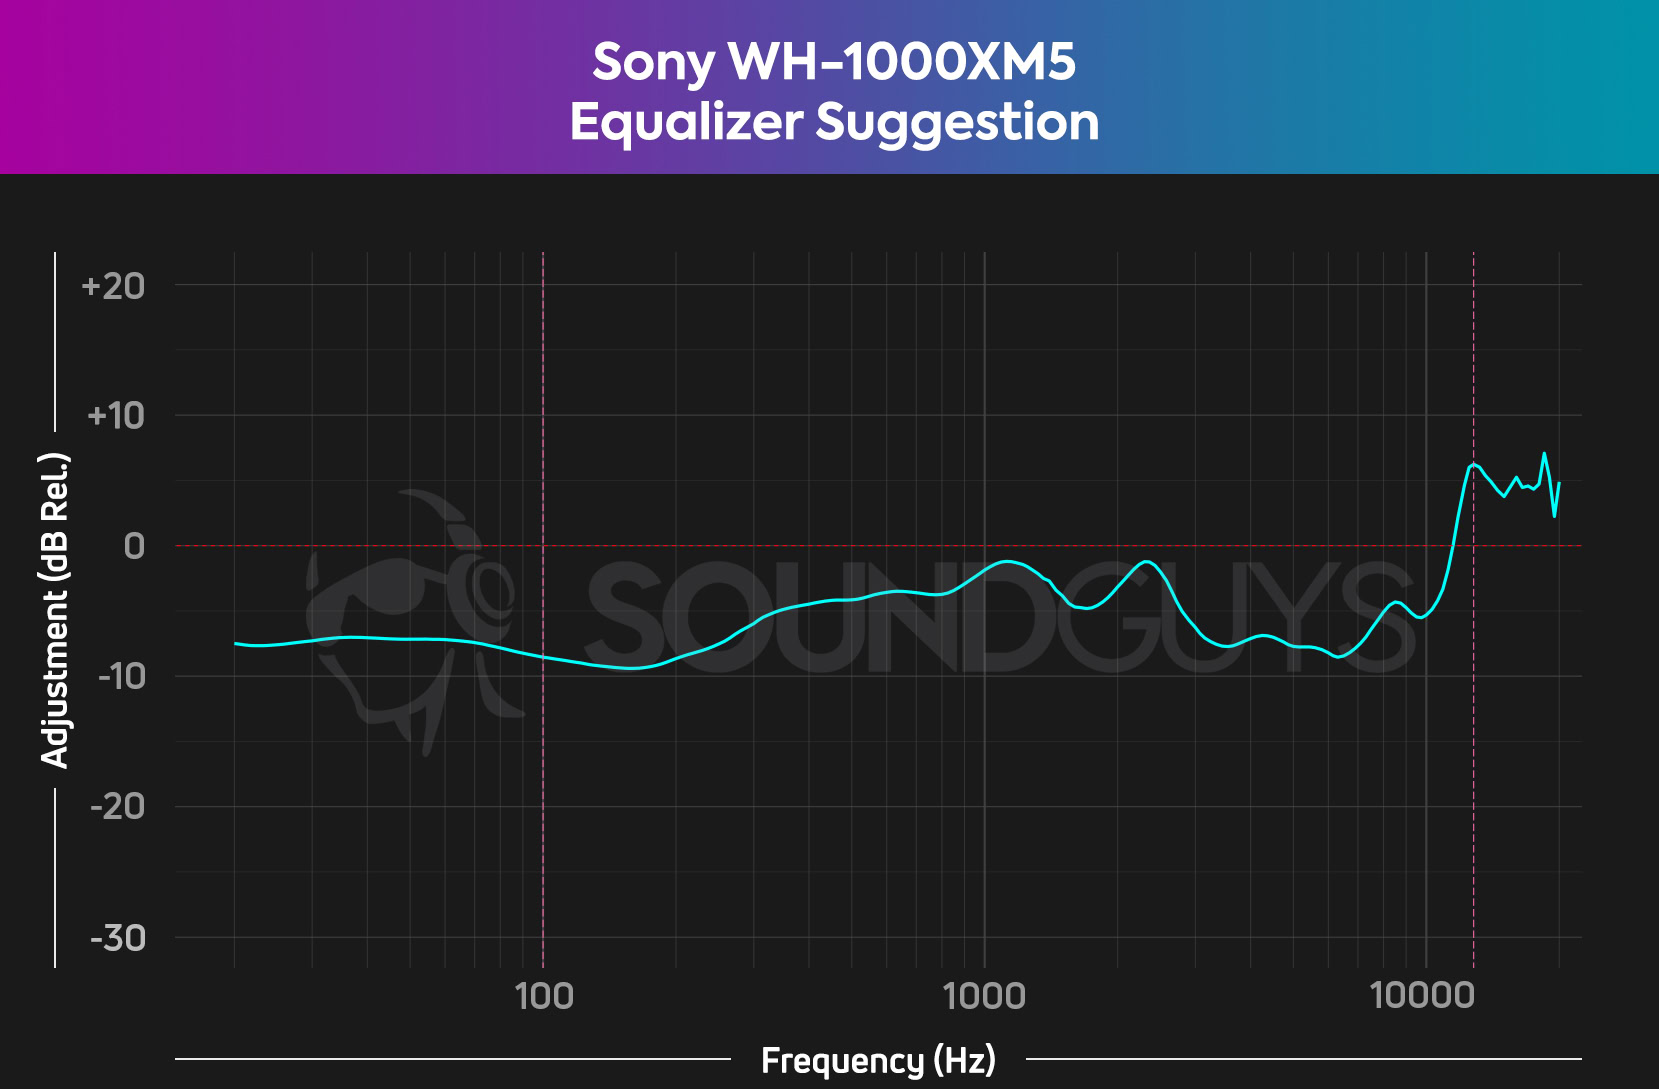 Sony WH-1000XM5 equalizer suggestions